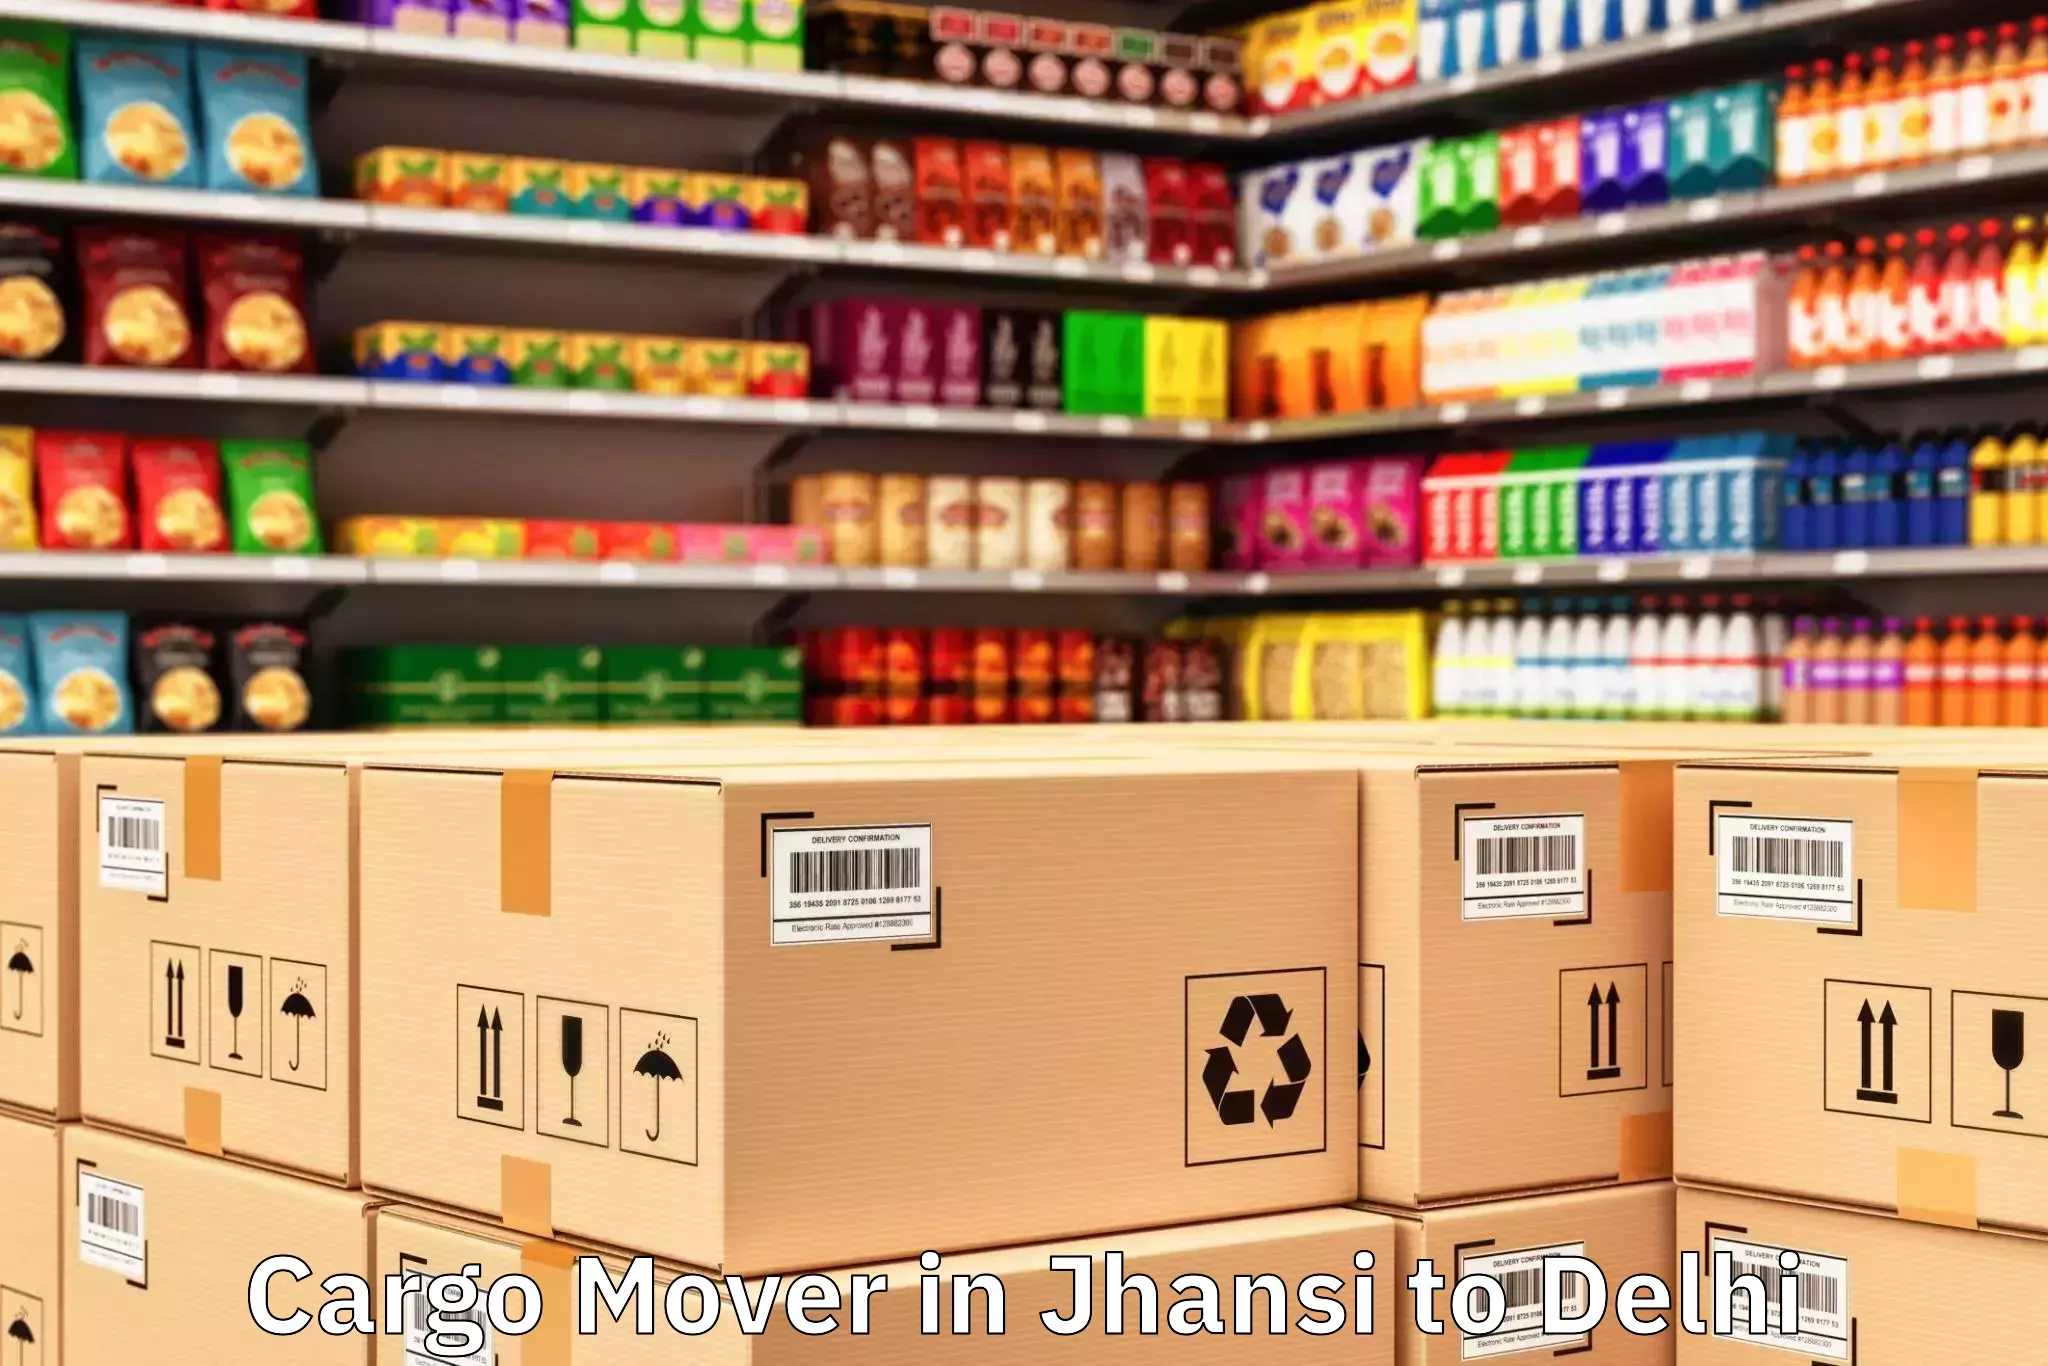 Get Jhansi to D Mall Rohini Cargo Mover